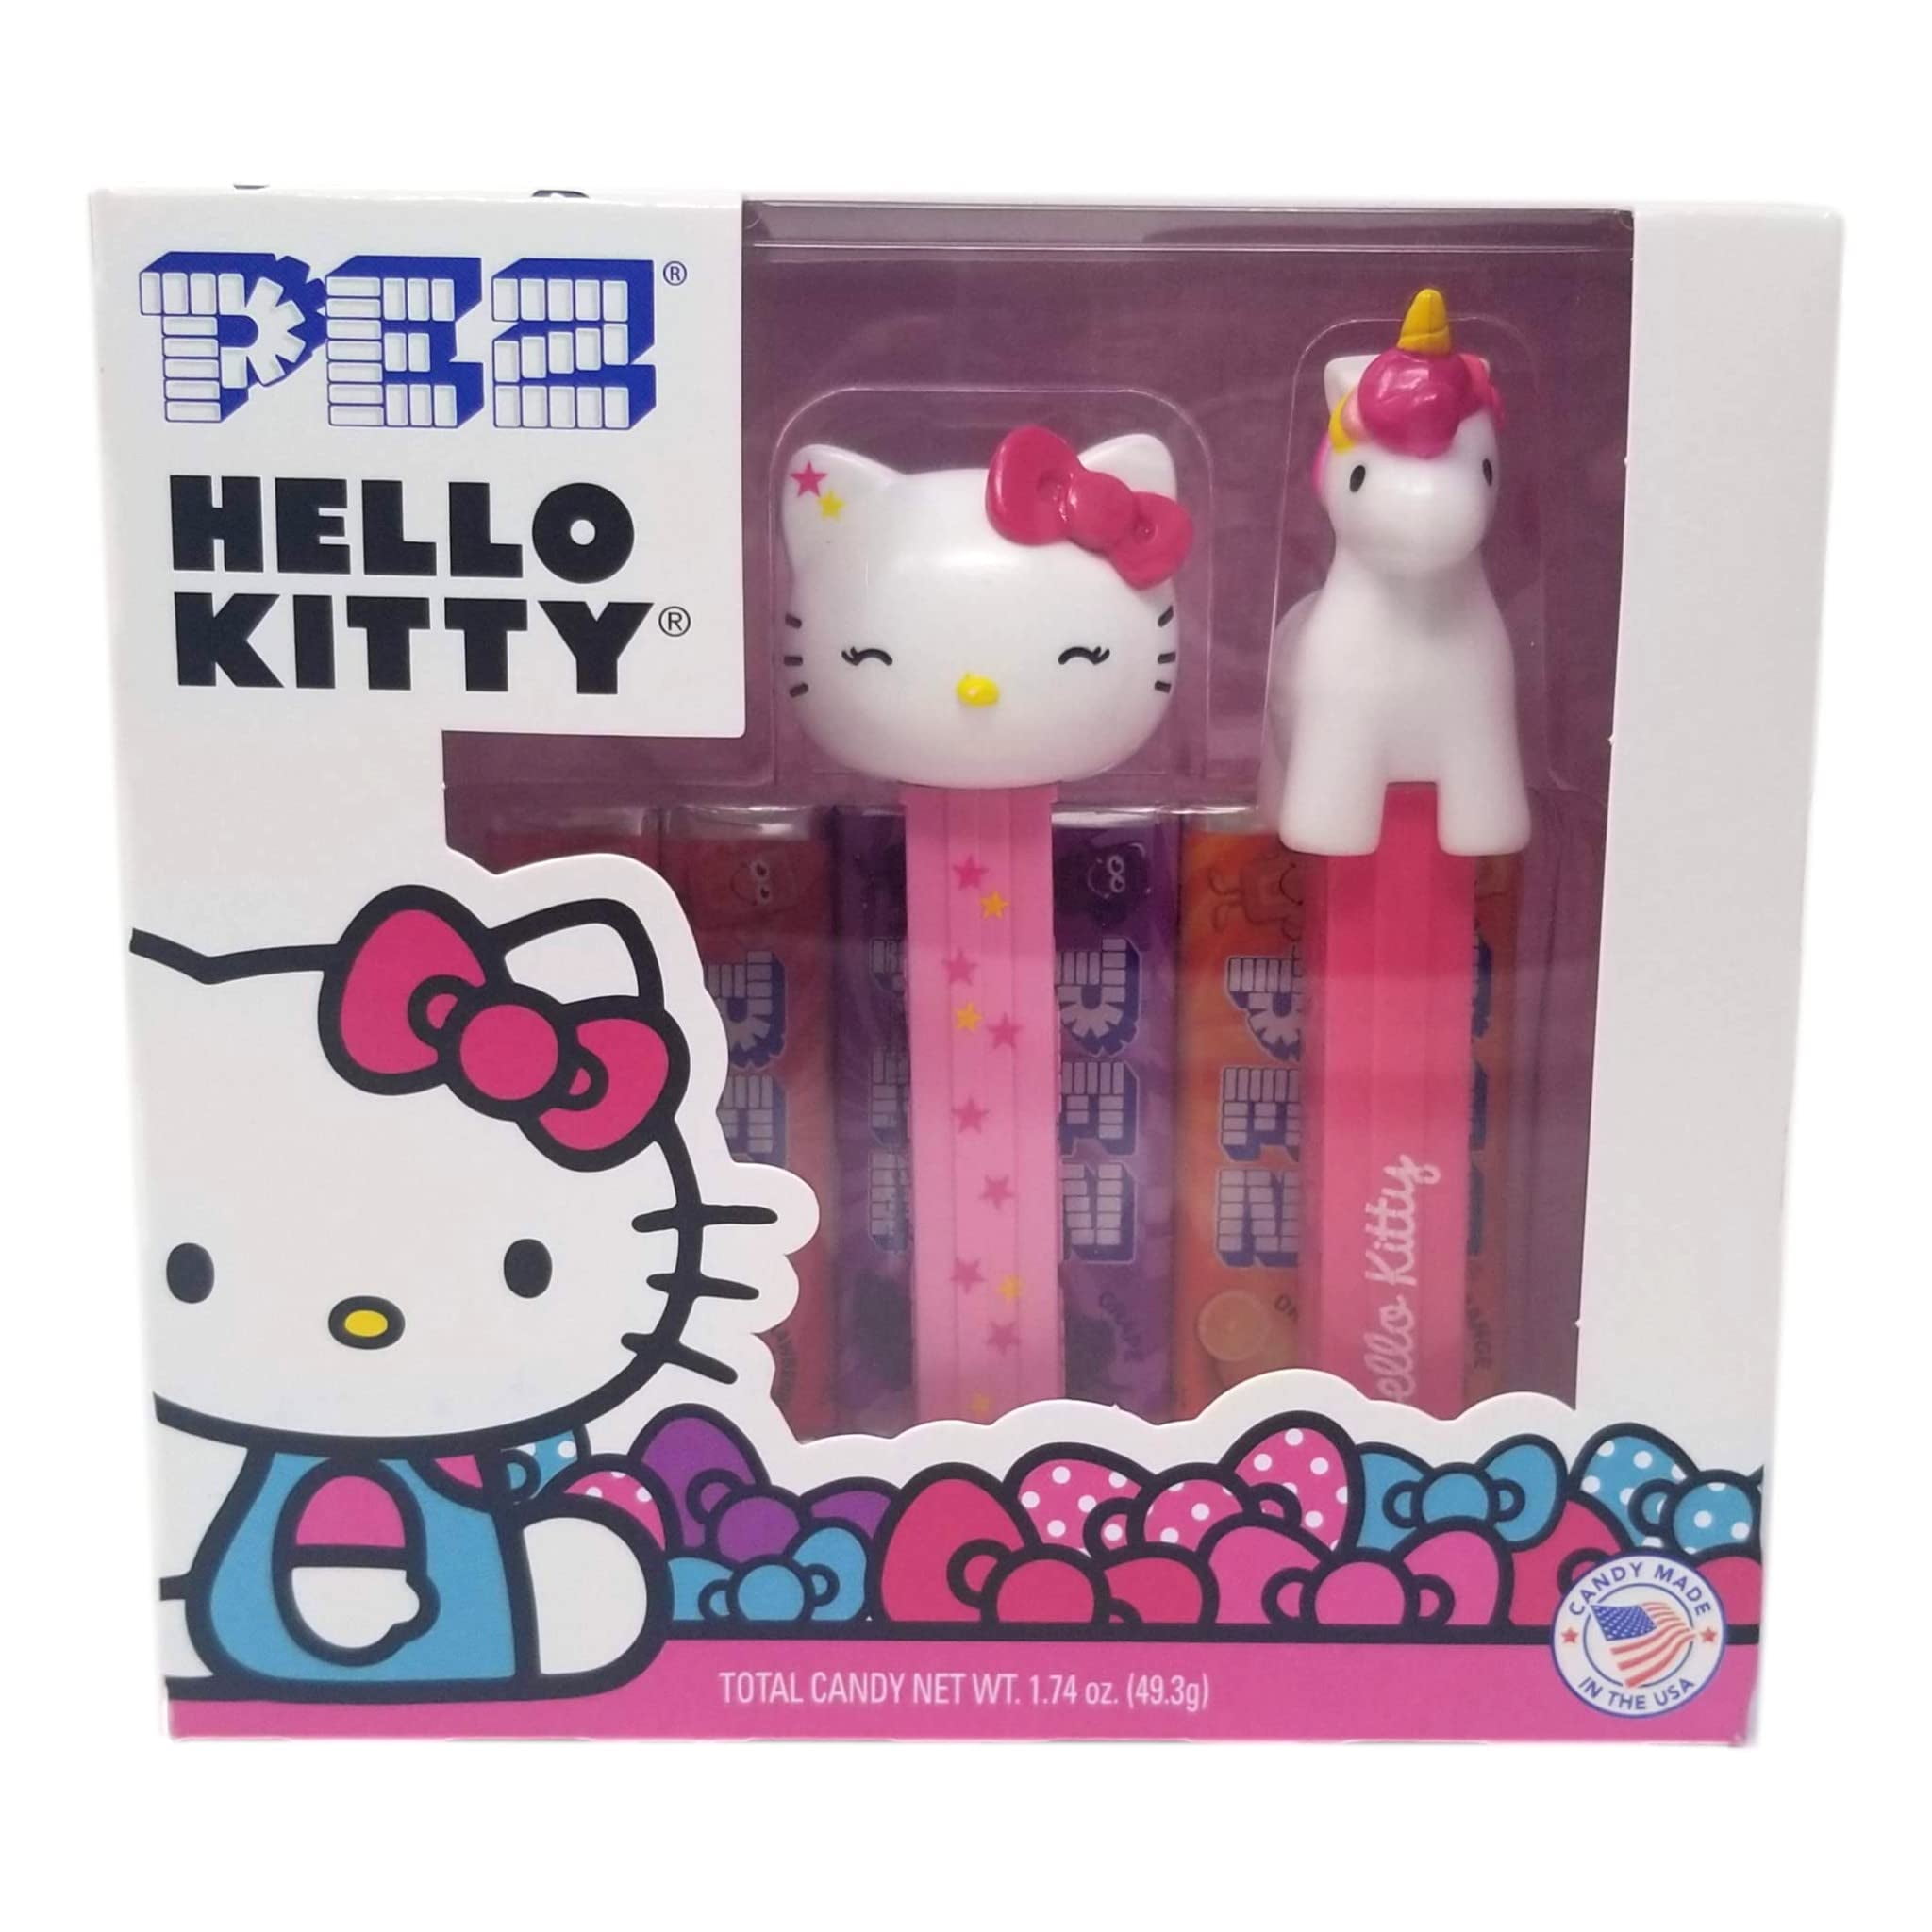 Hello Kitty Rectangle Storage Bench in Pink with Kitty Image onTop by Sanrio 